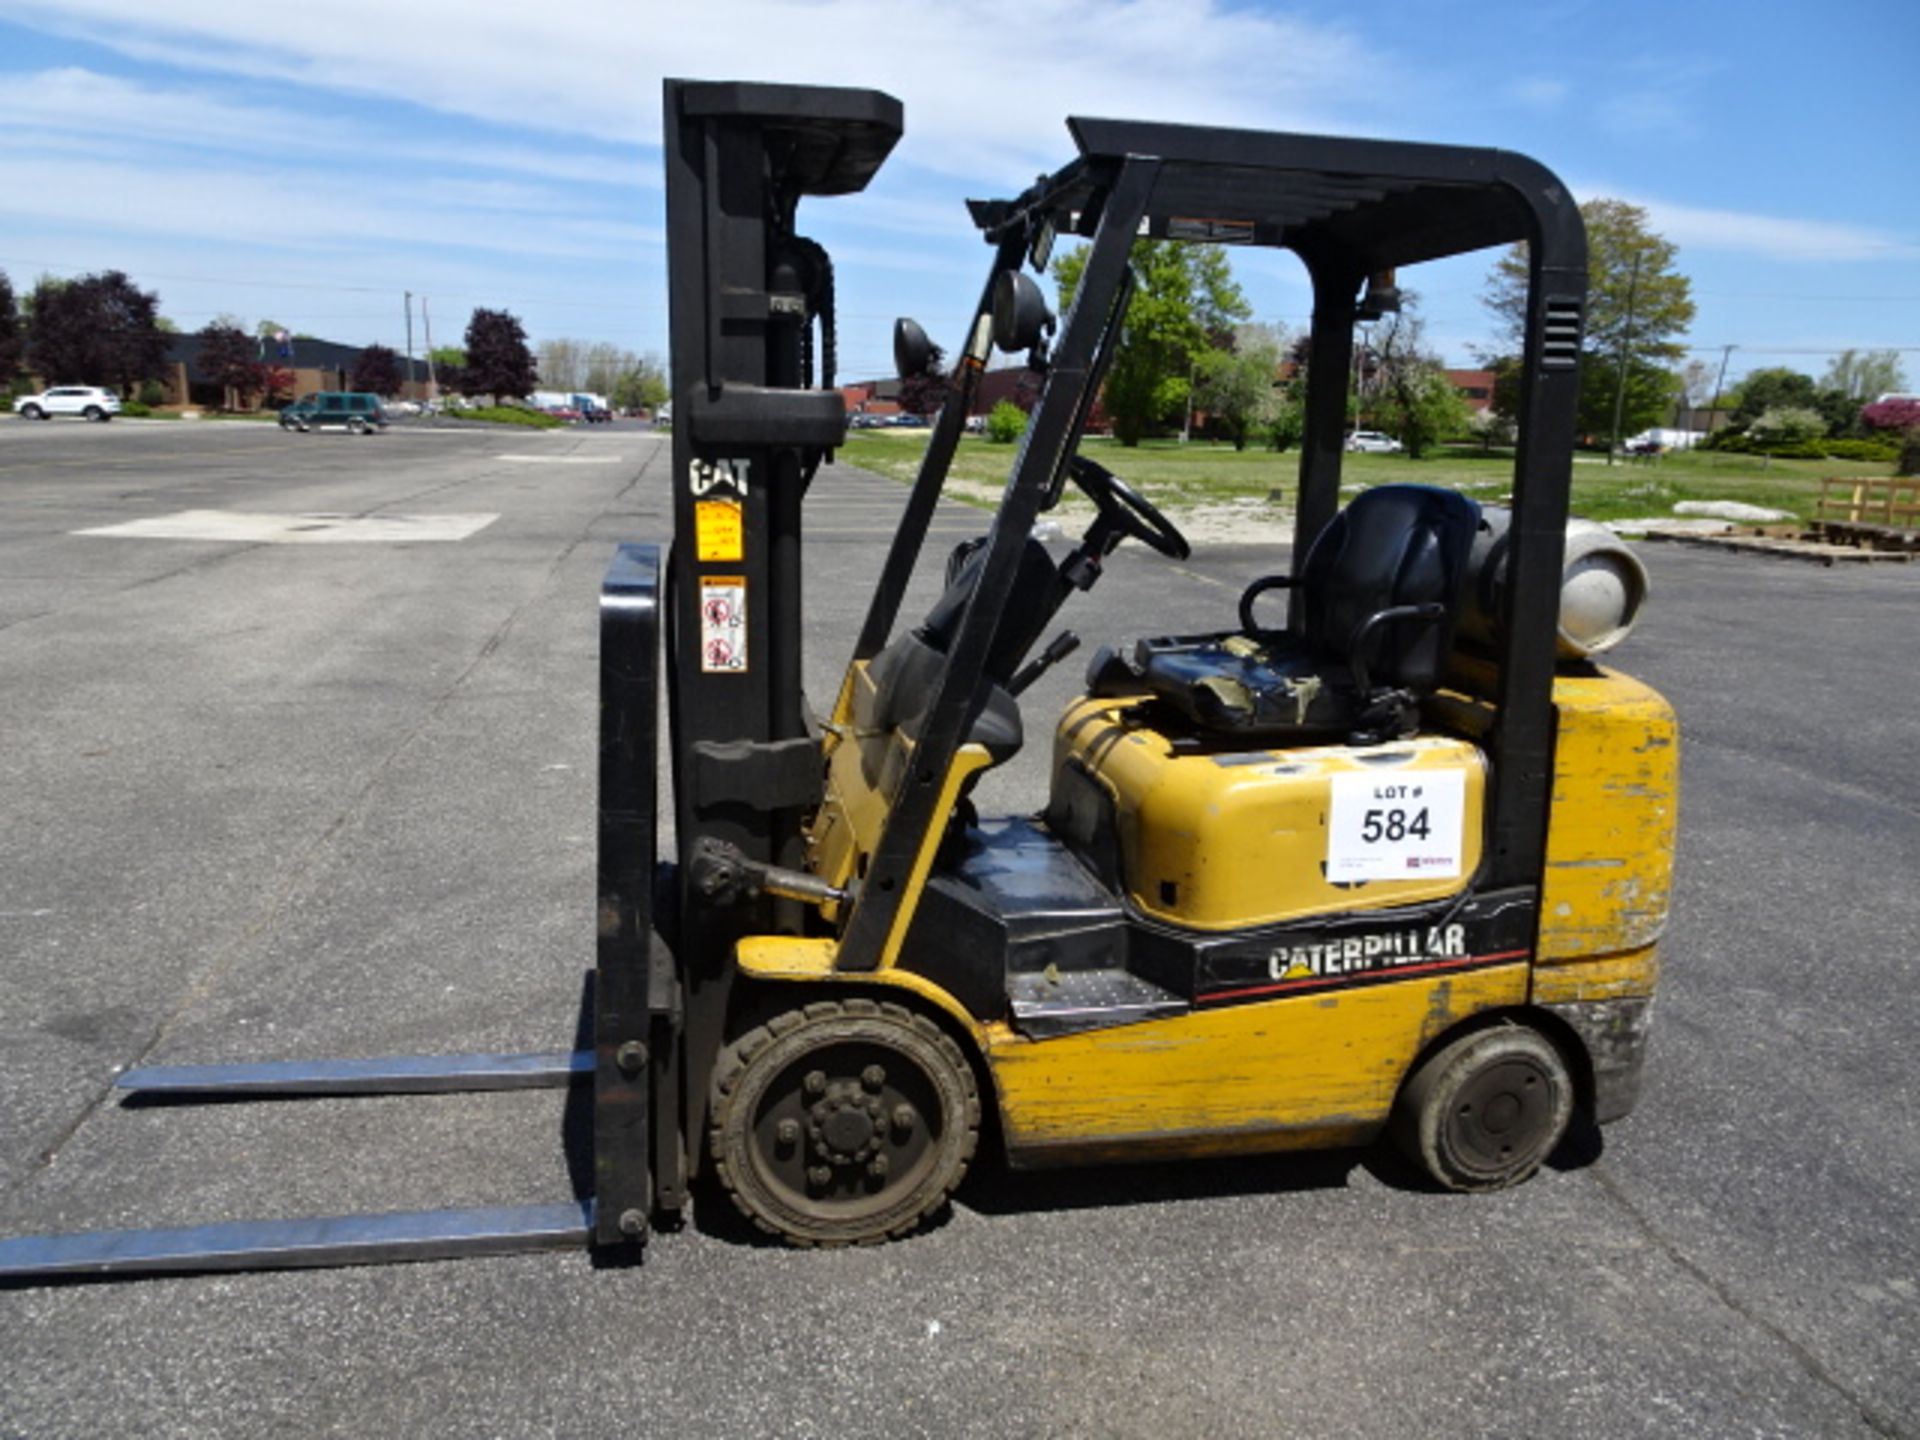 Caterpillar LPG 5000-Lb Forklift w/ Triple Mast, Side Shift, Solid Wide Track Tires, 14487 Hours, - Image 3 of 4